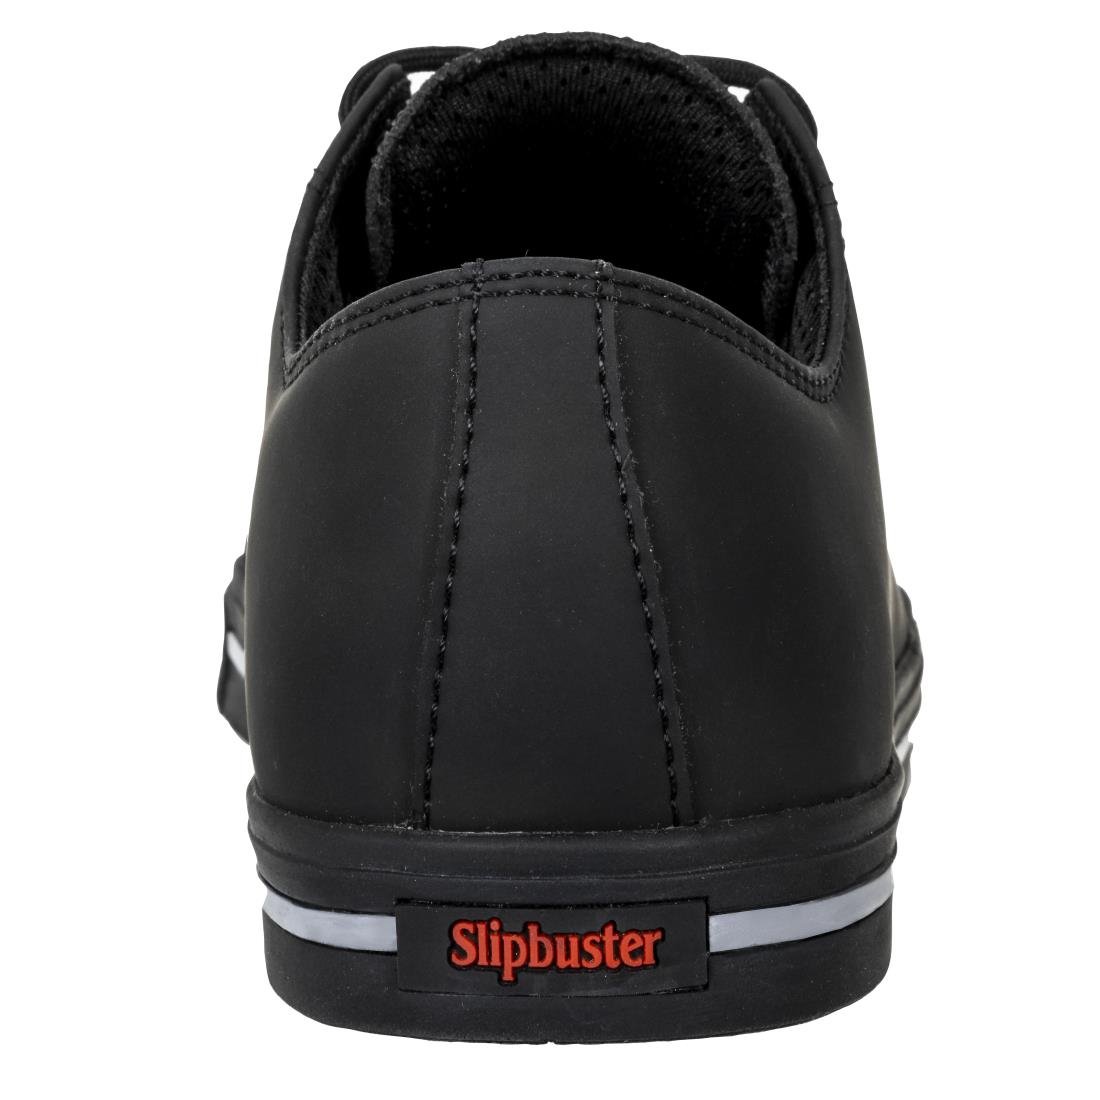 BA060-44 Slipbuster Recycled Microfibre Safety Trainers Matte Black 44 JD Catering Equipment Solutions Ltd